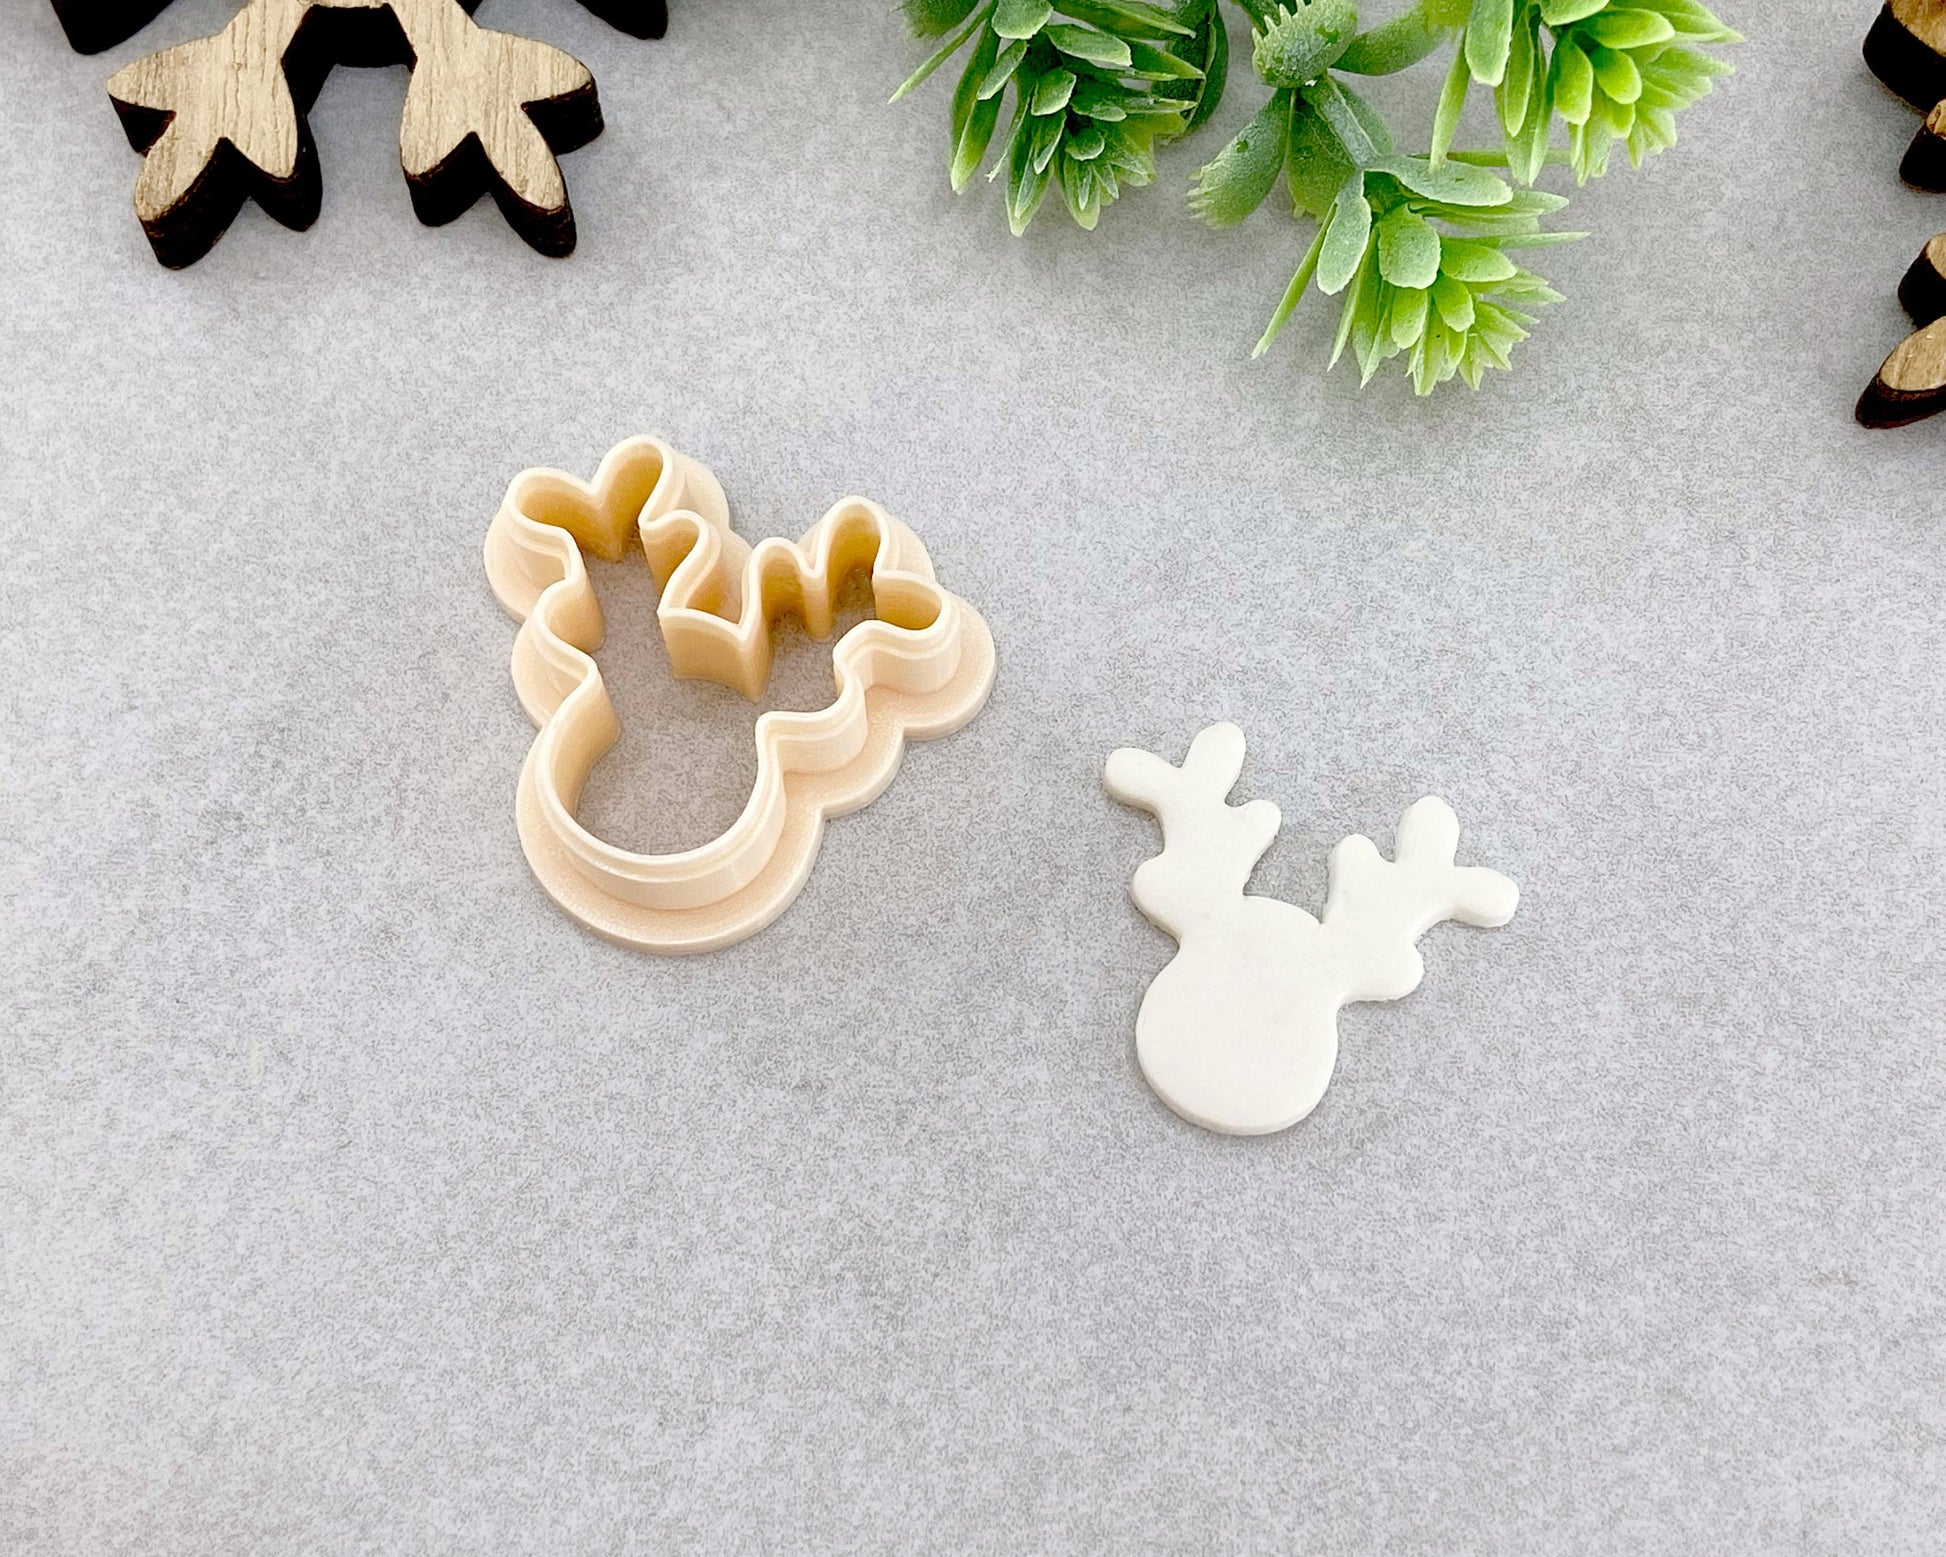 HOLIDAY EDITION Cookie Box Cutter Set, Clay Cutters